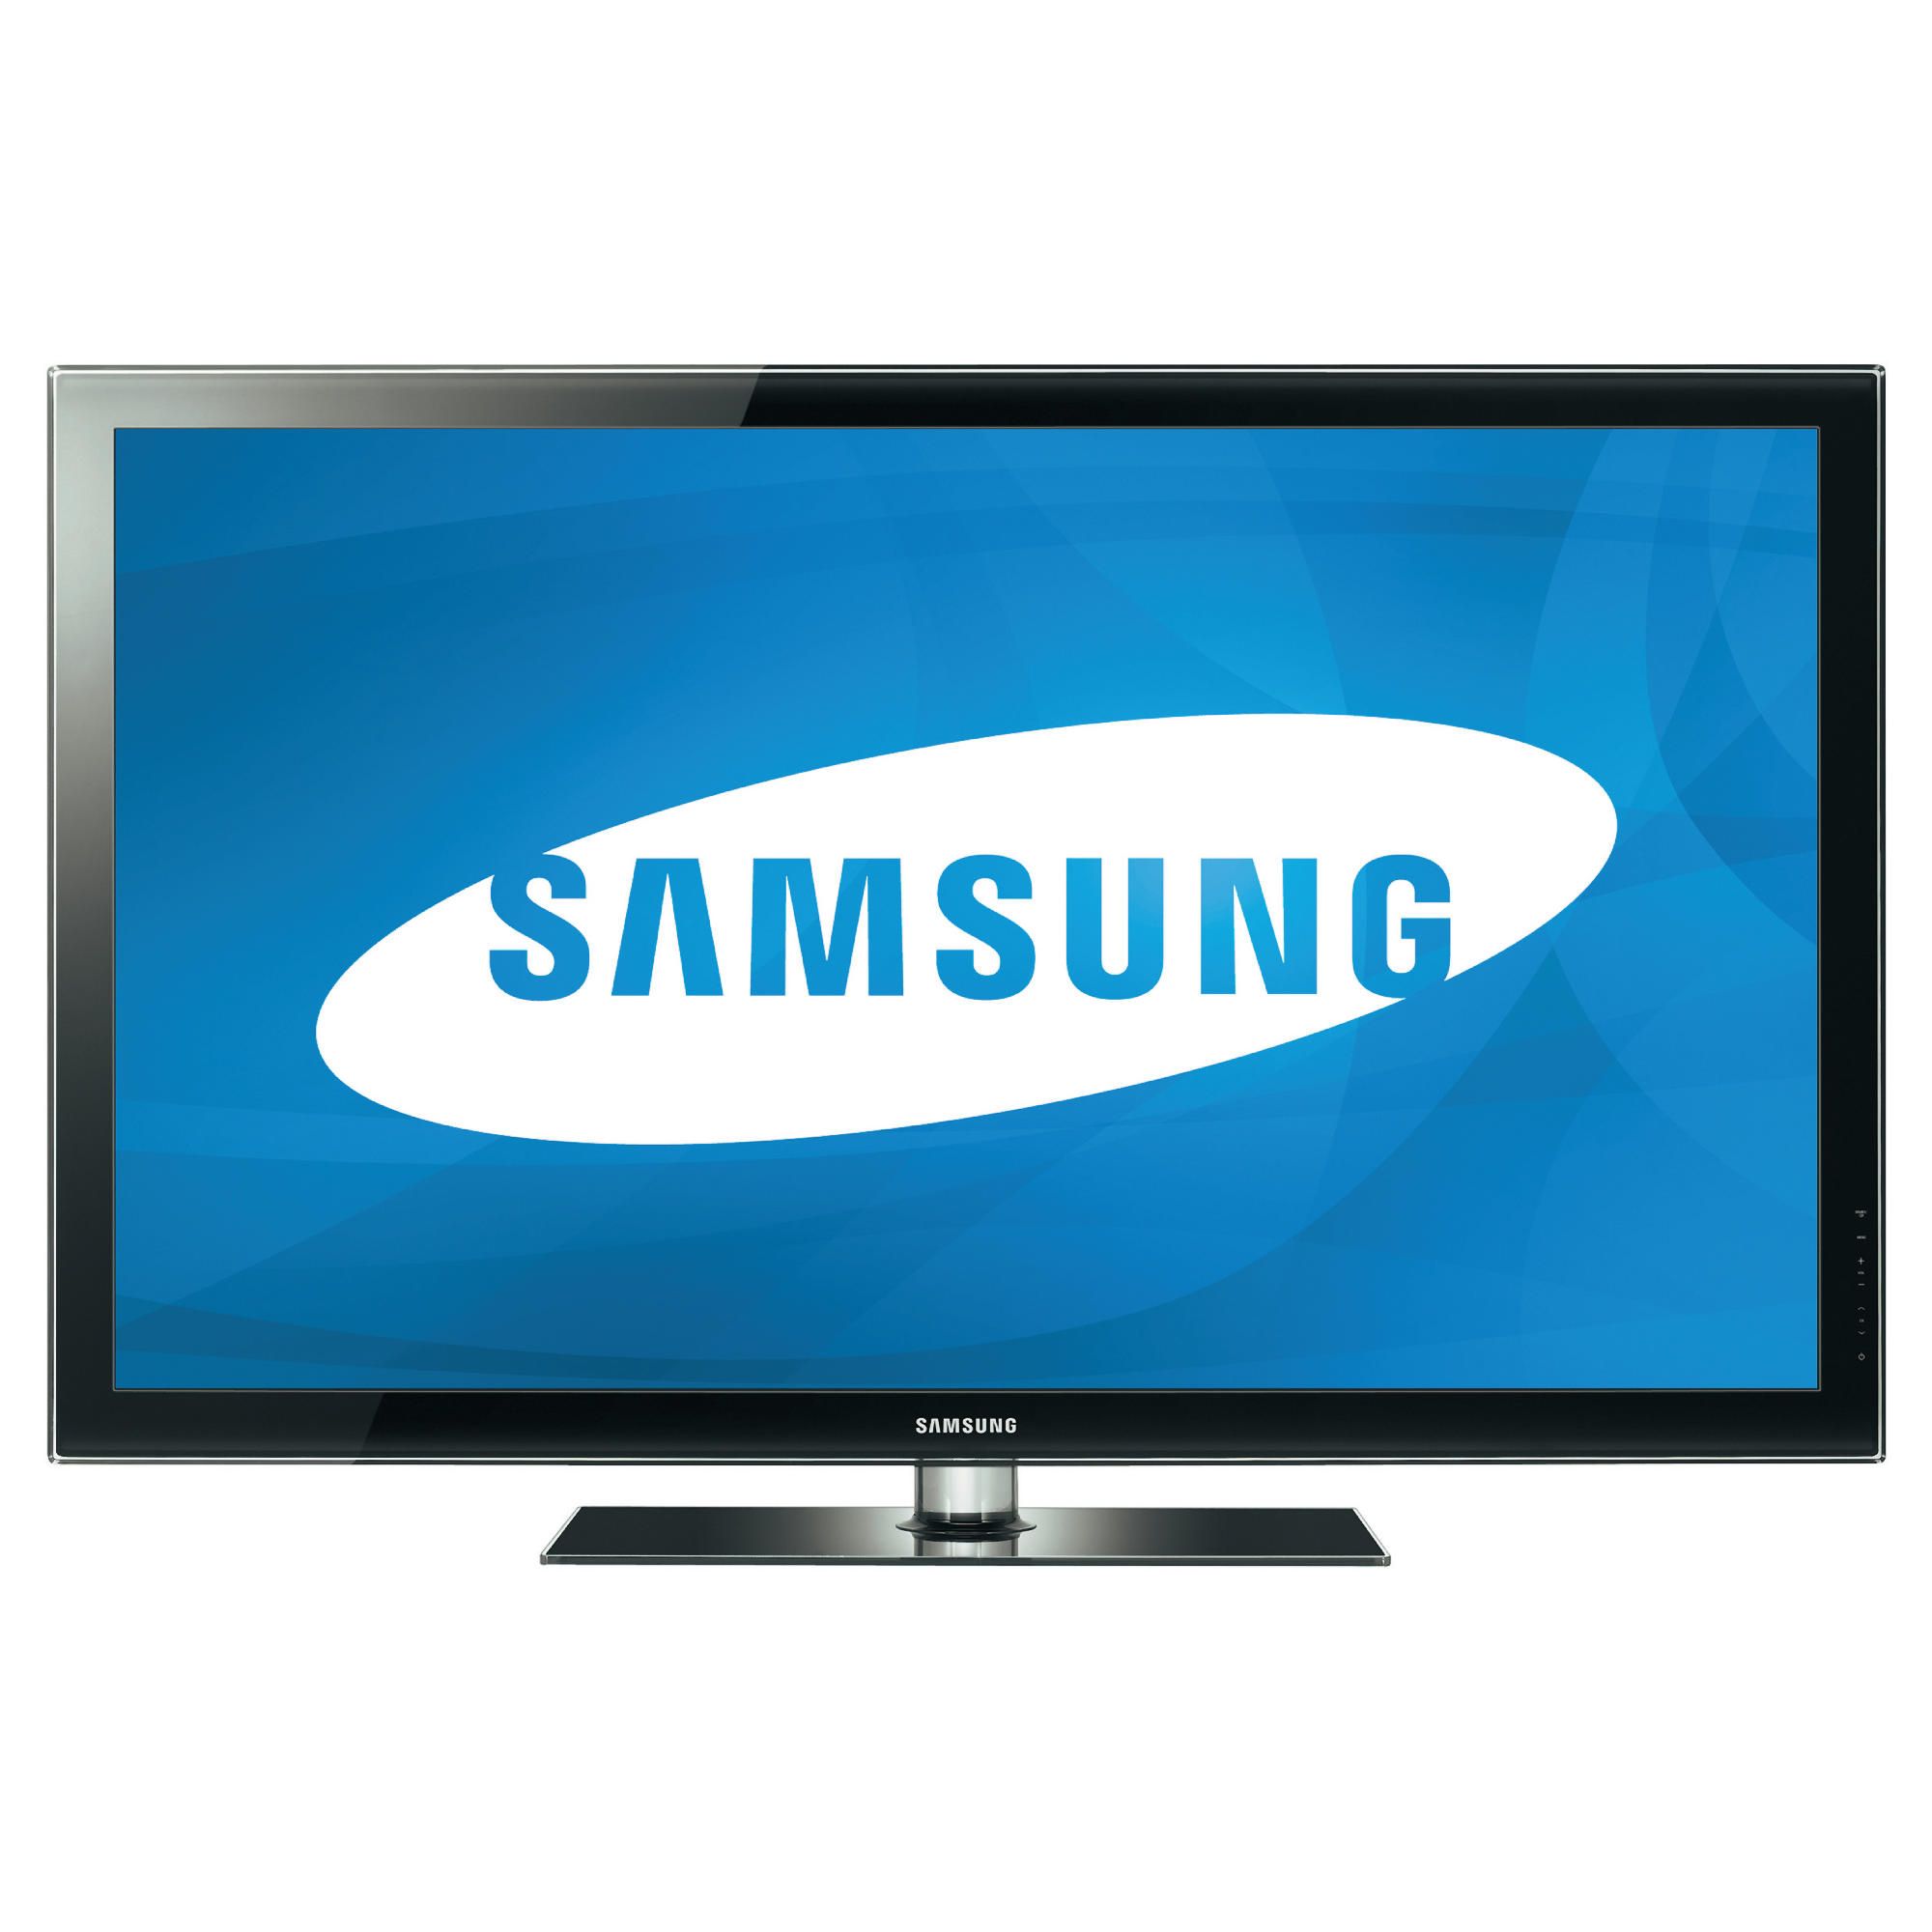 Samsung PS51D495 51” HD Ready 3D Plasma TV with Freeview HD